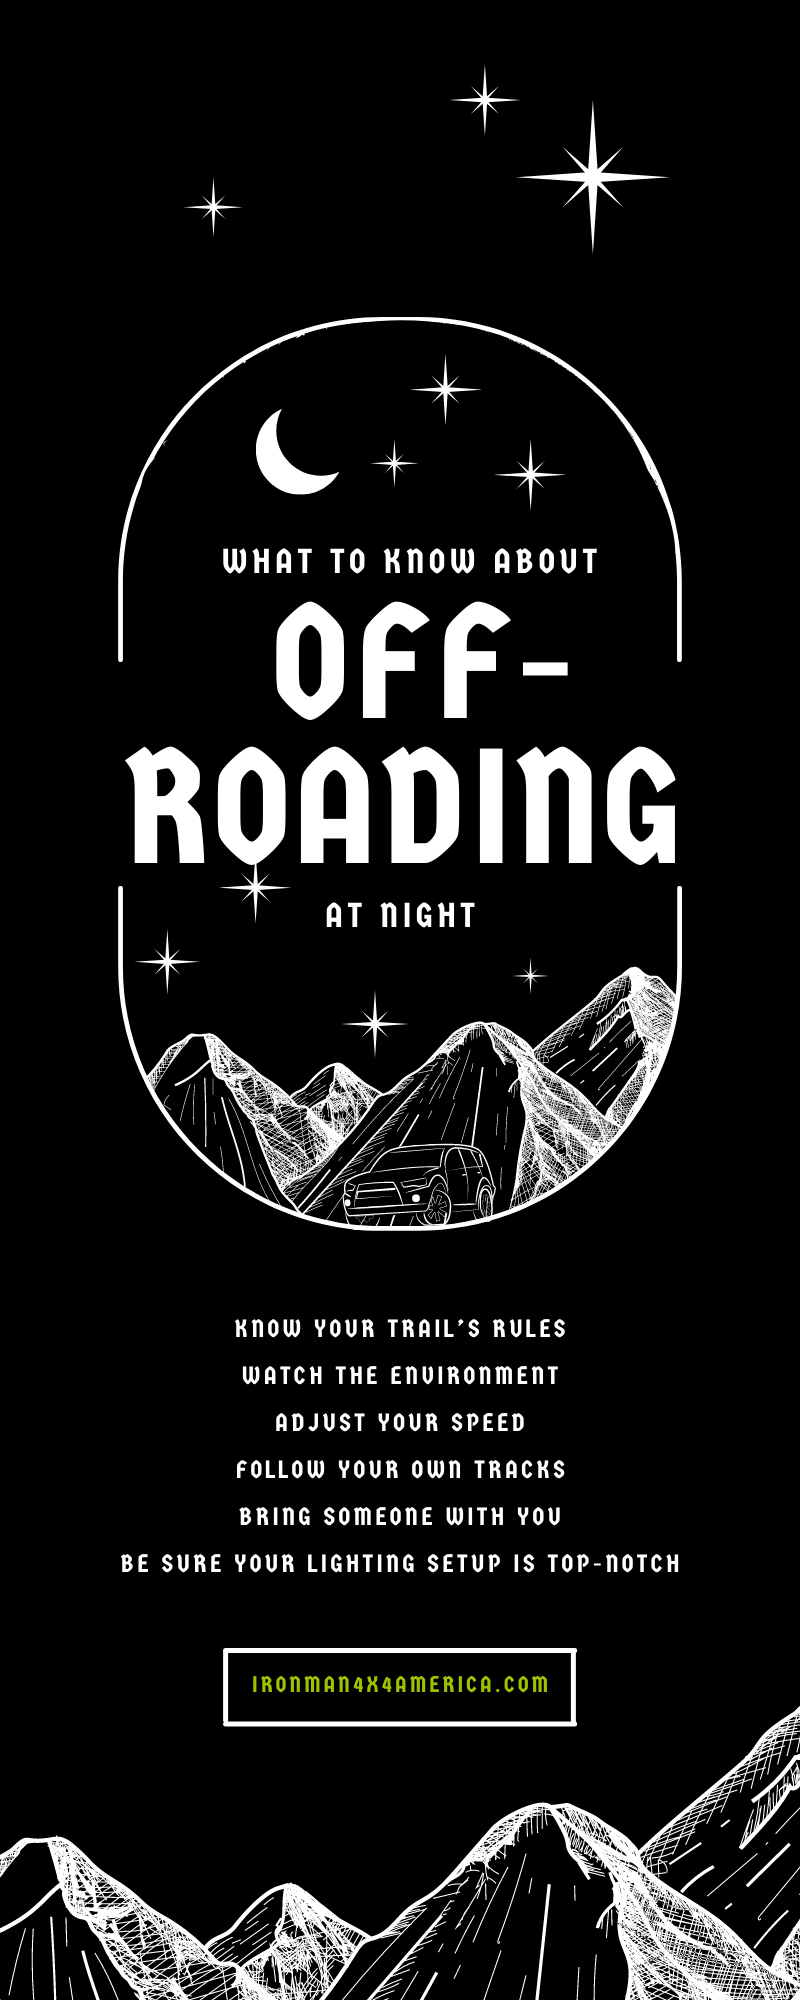 What To Know About Off-Roading at Night